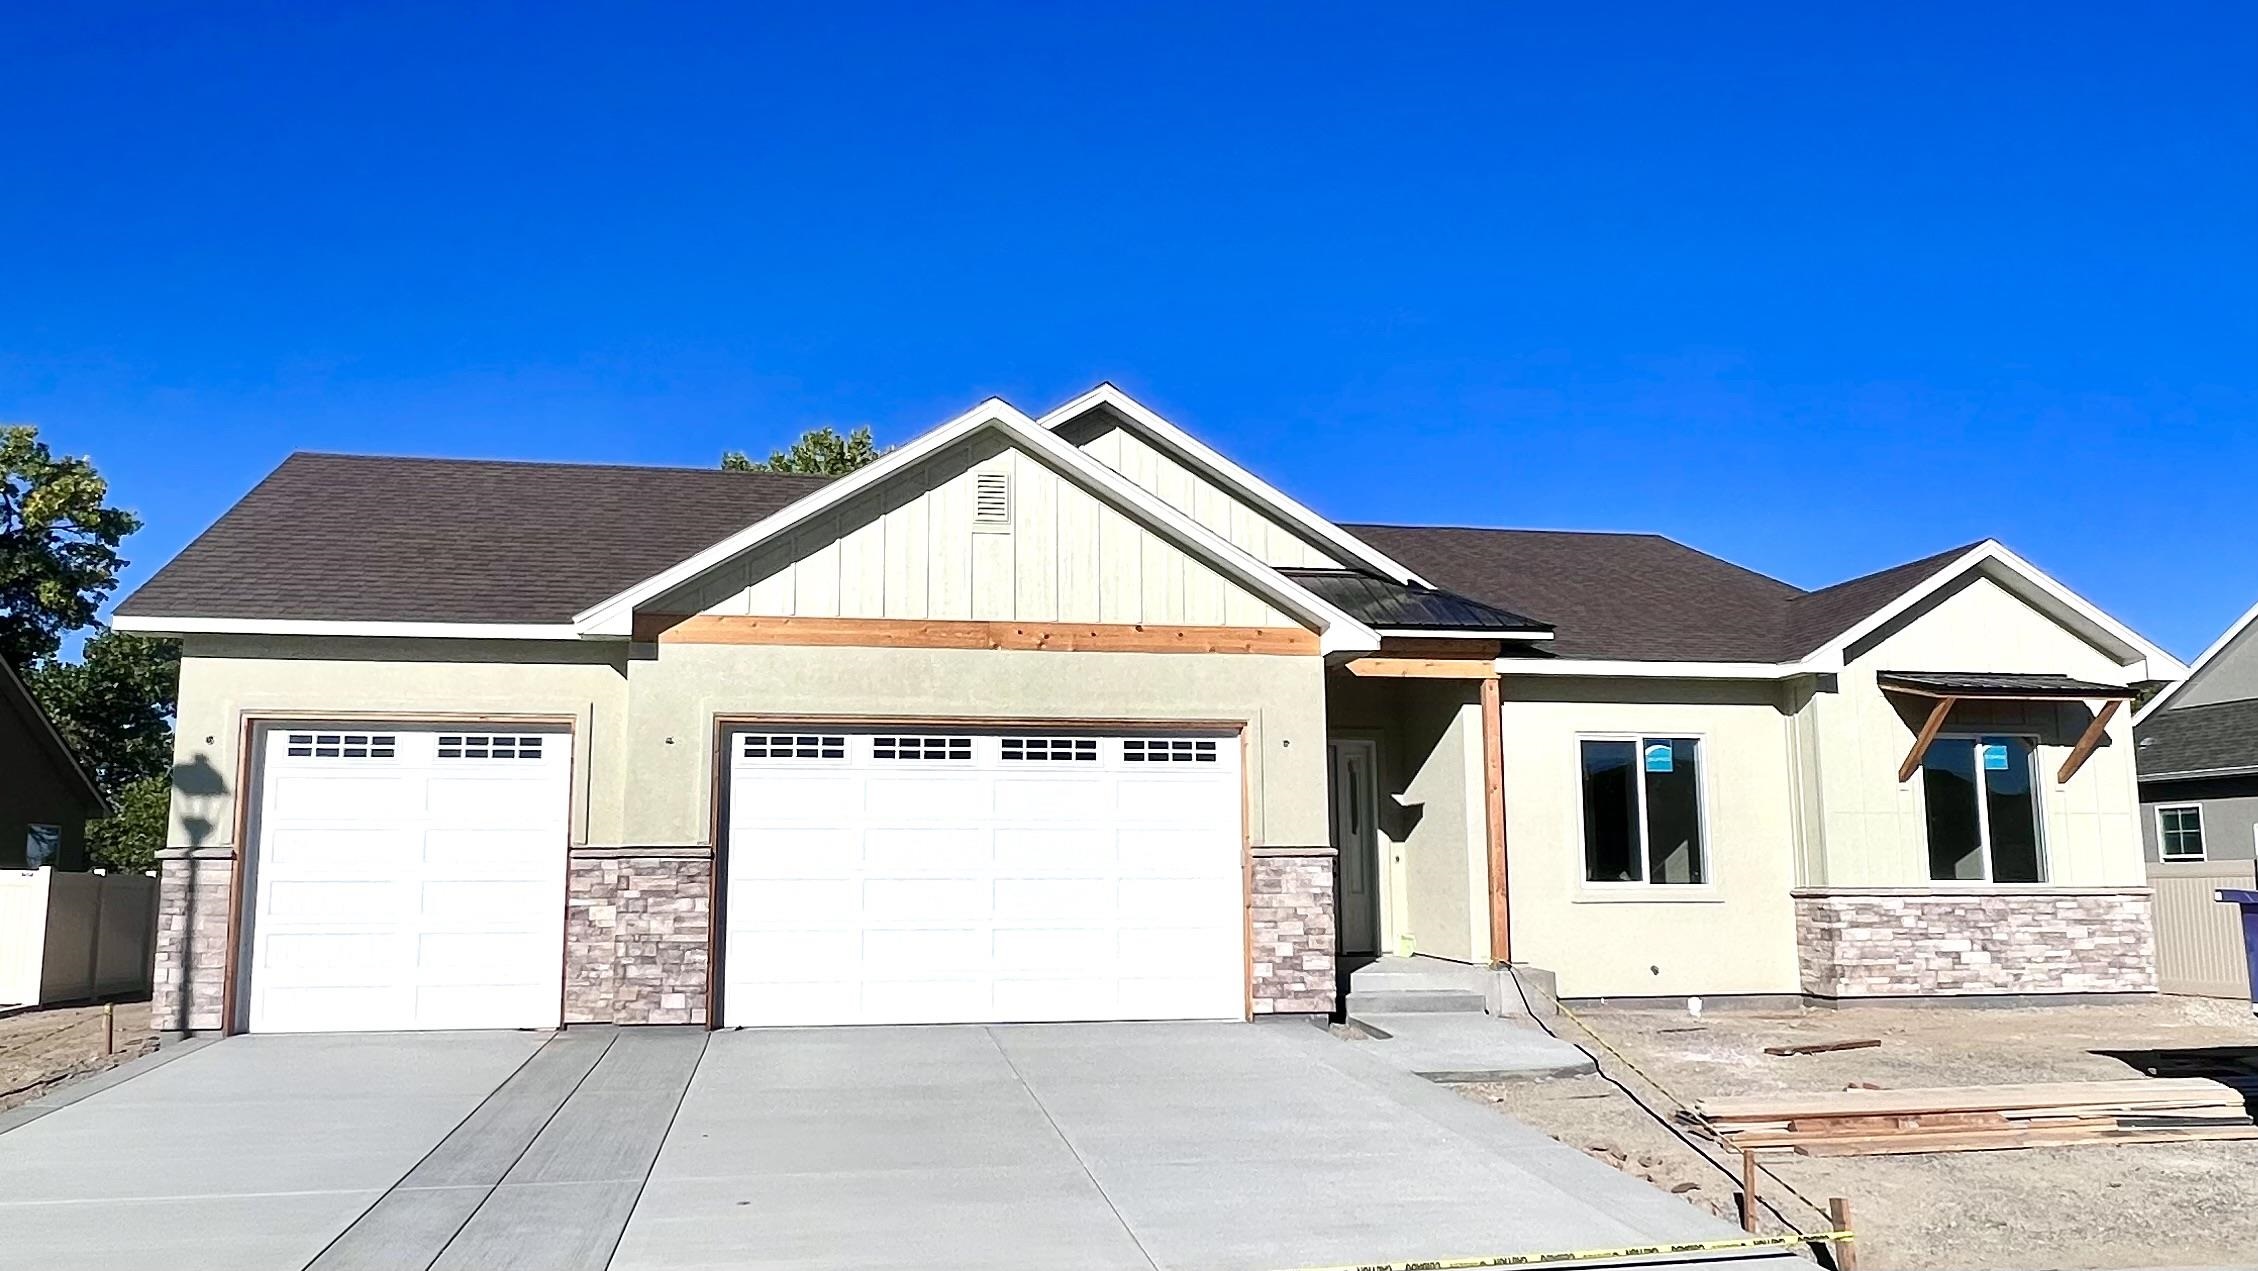 This stunning new build is a MUST SEE! Located in the desirable Orchard Ridge subdivision just minutes from downtown Fruita.  Spacious lot with room for RV parking, backing to open field bordered with mature trees. Boasting a wonderful 4 bedroom, 3 bath floorplan with beautiful custom finishes. Extra tall ceilings and doors throughout, along with  9' Garage doors to accommodate large trucks and cars.  This home is also heated with the new, wonderfully efficient, Heat Recovery System.   All information is subject to change/error without notice. Buyer(s) to verify all.